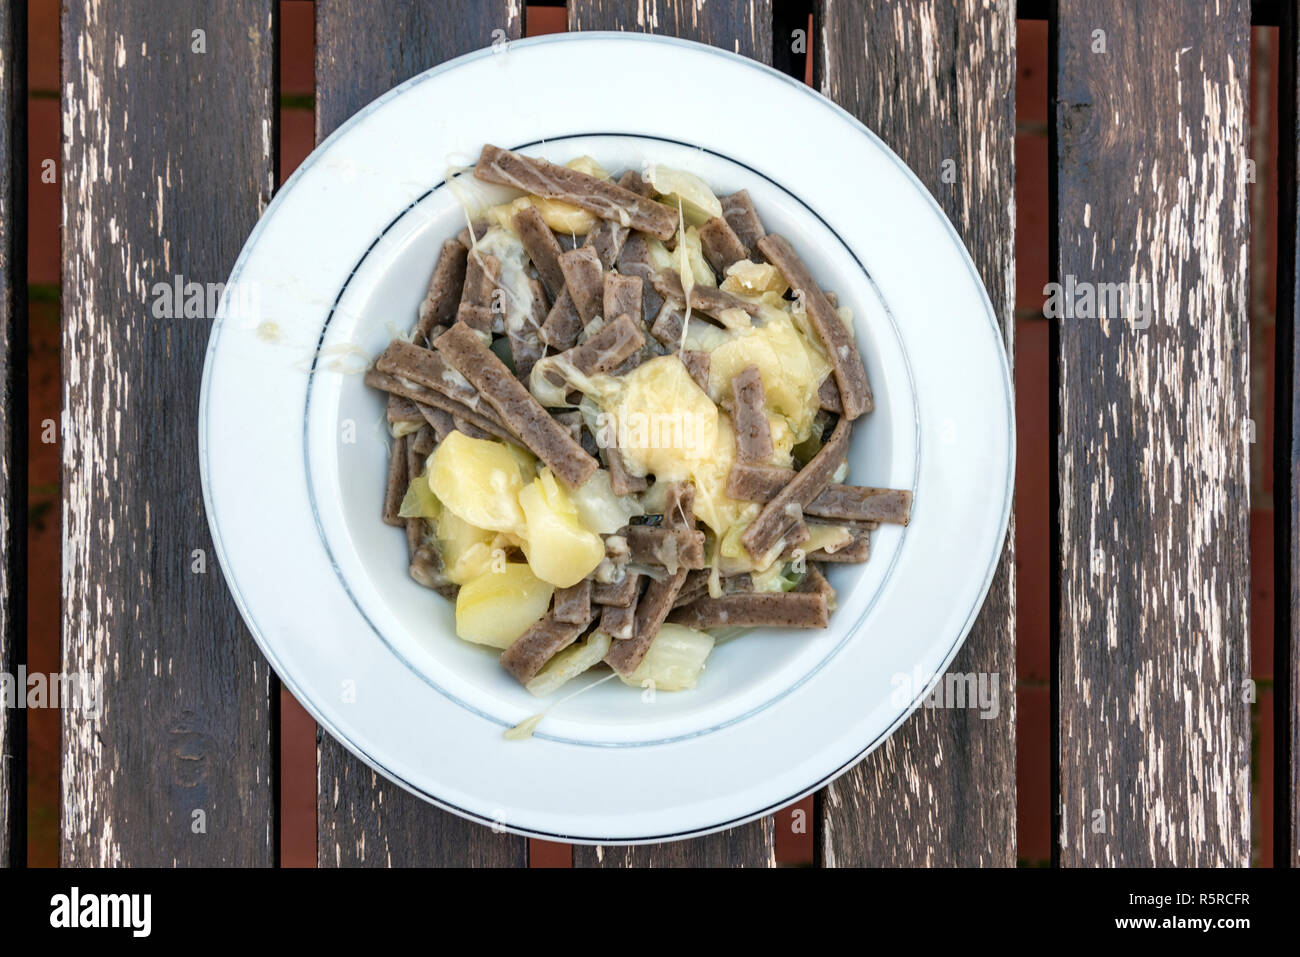 Pizzoccheri dish, a traditional short tagliatelle pasta typical of northern Italian province of Valtellina, Italy Stock Photo